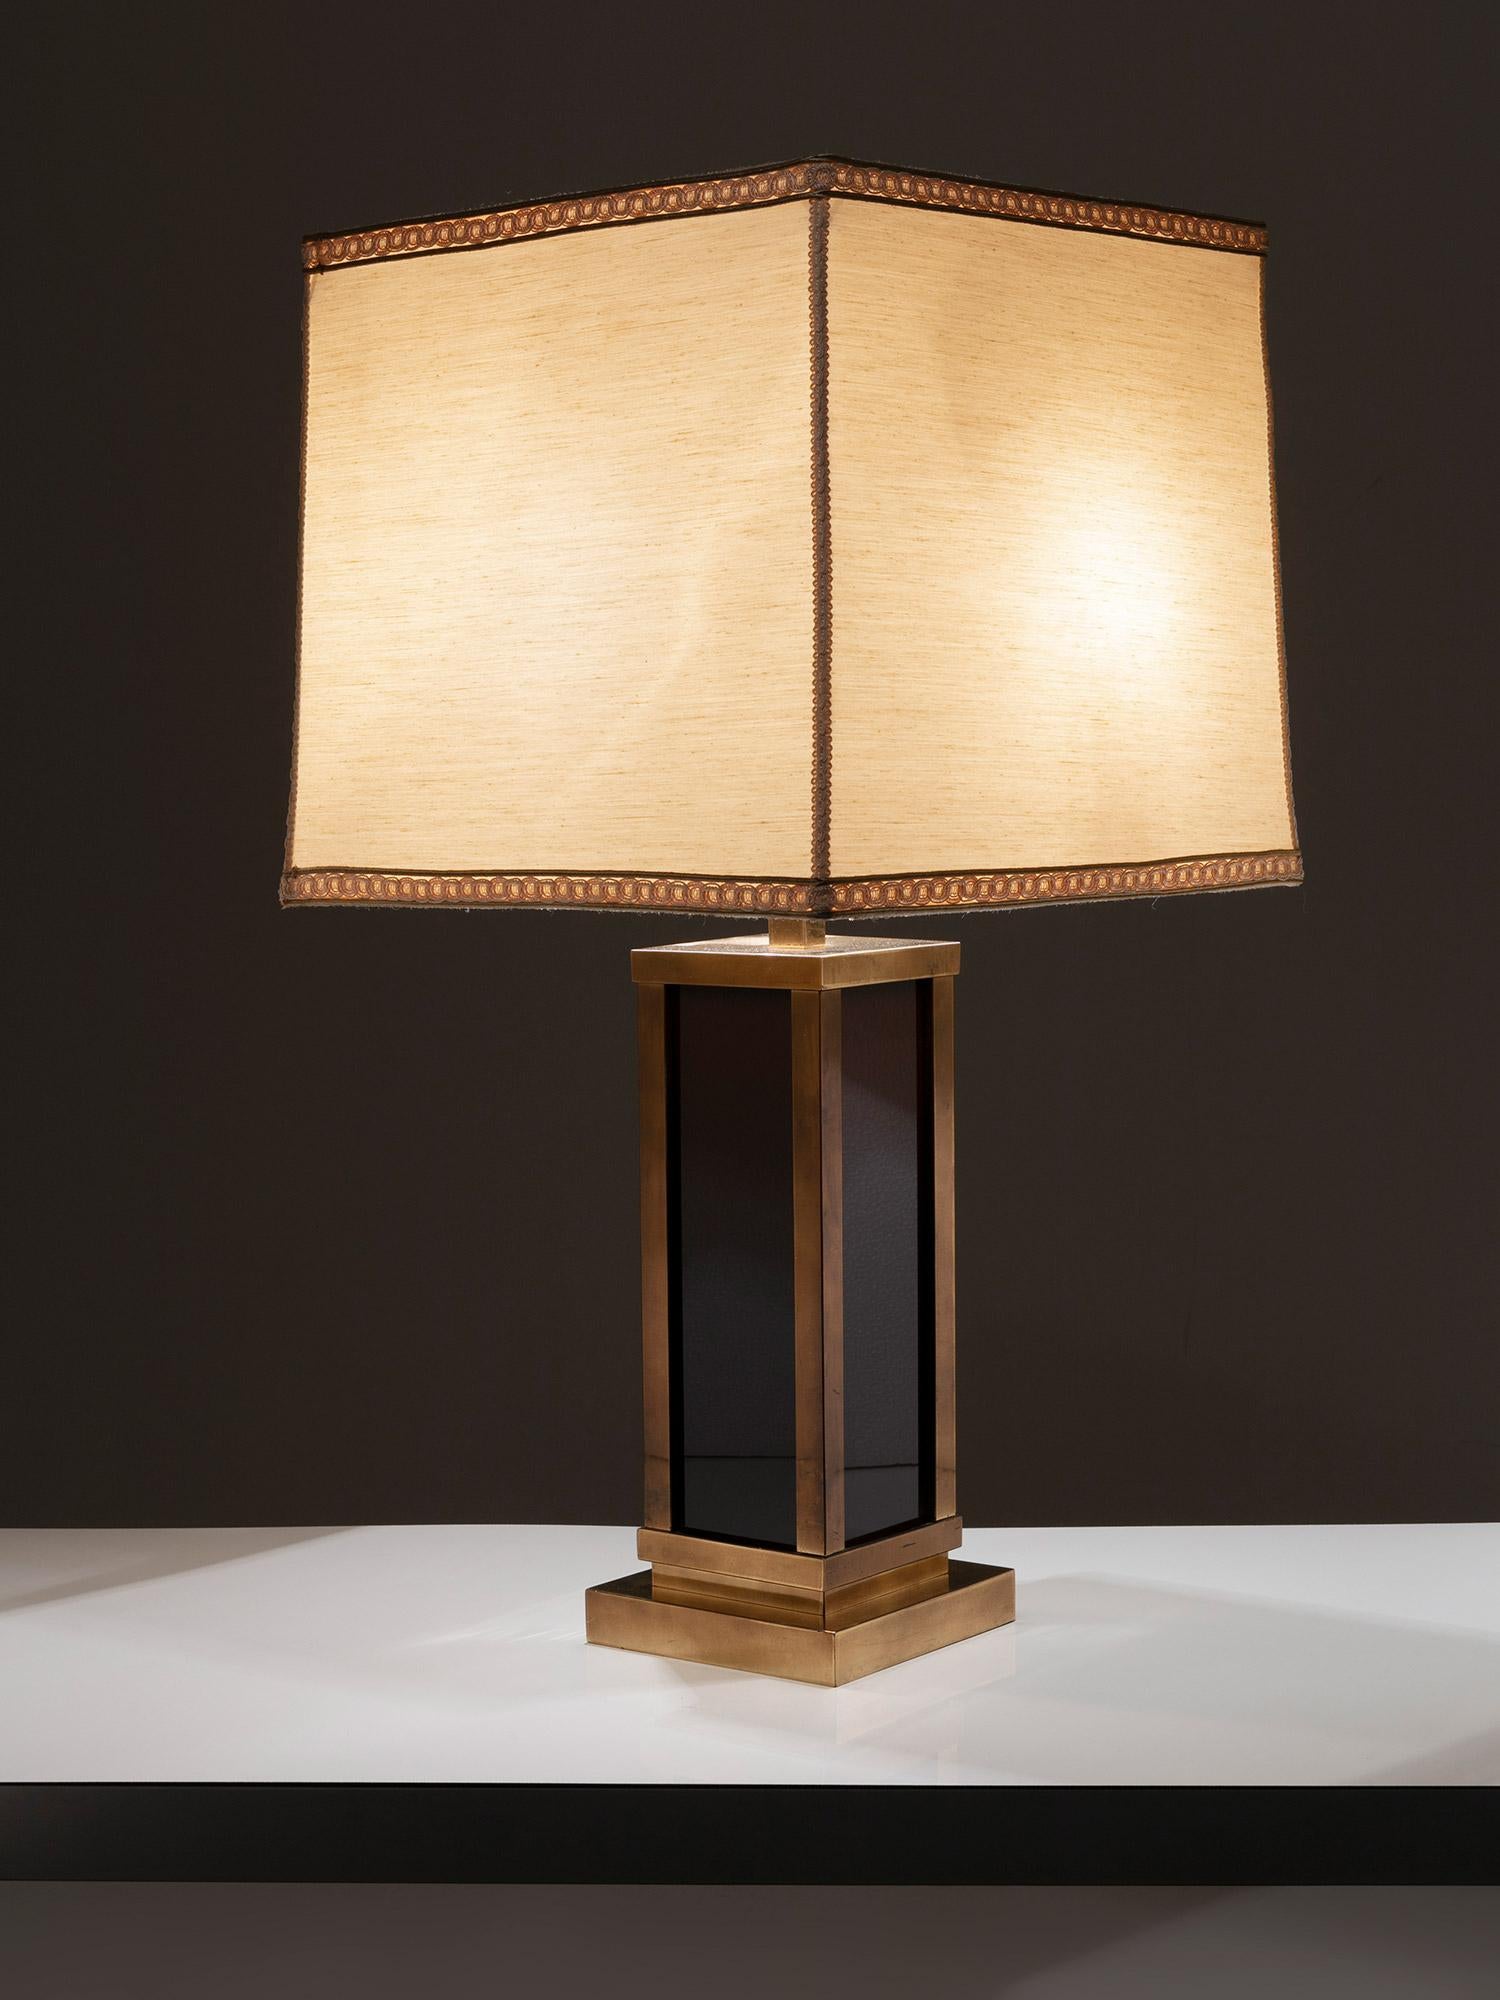 Large Itaian 70s table lamp.
Imposign squared base with brass body.